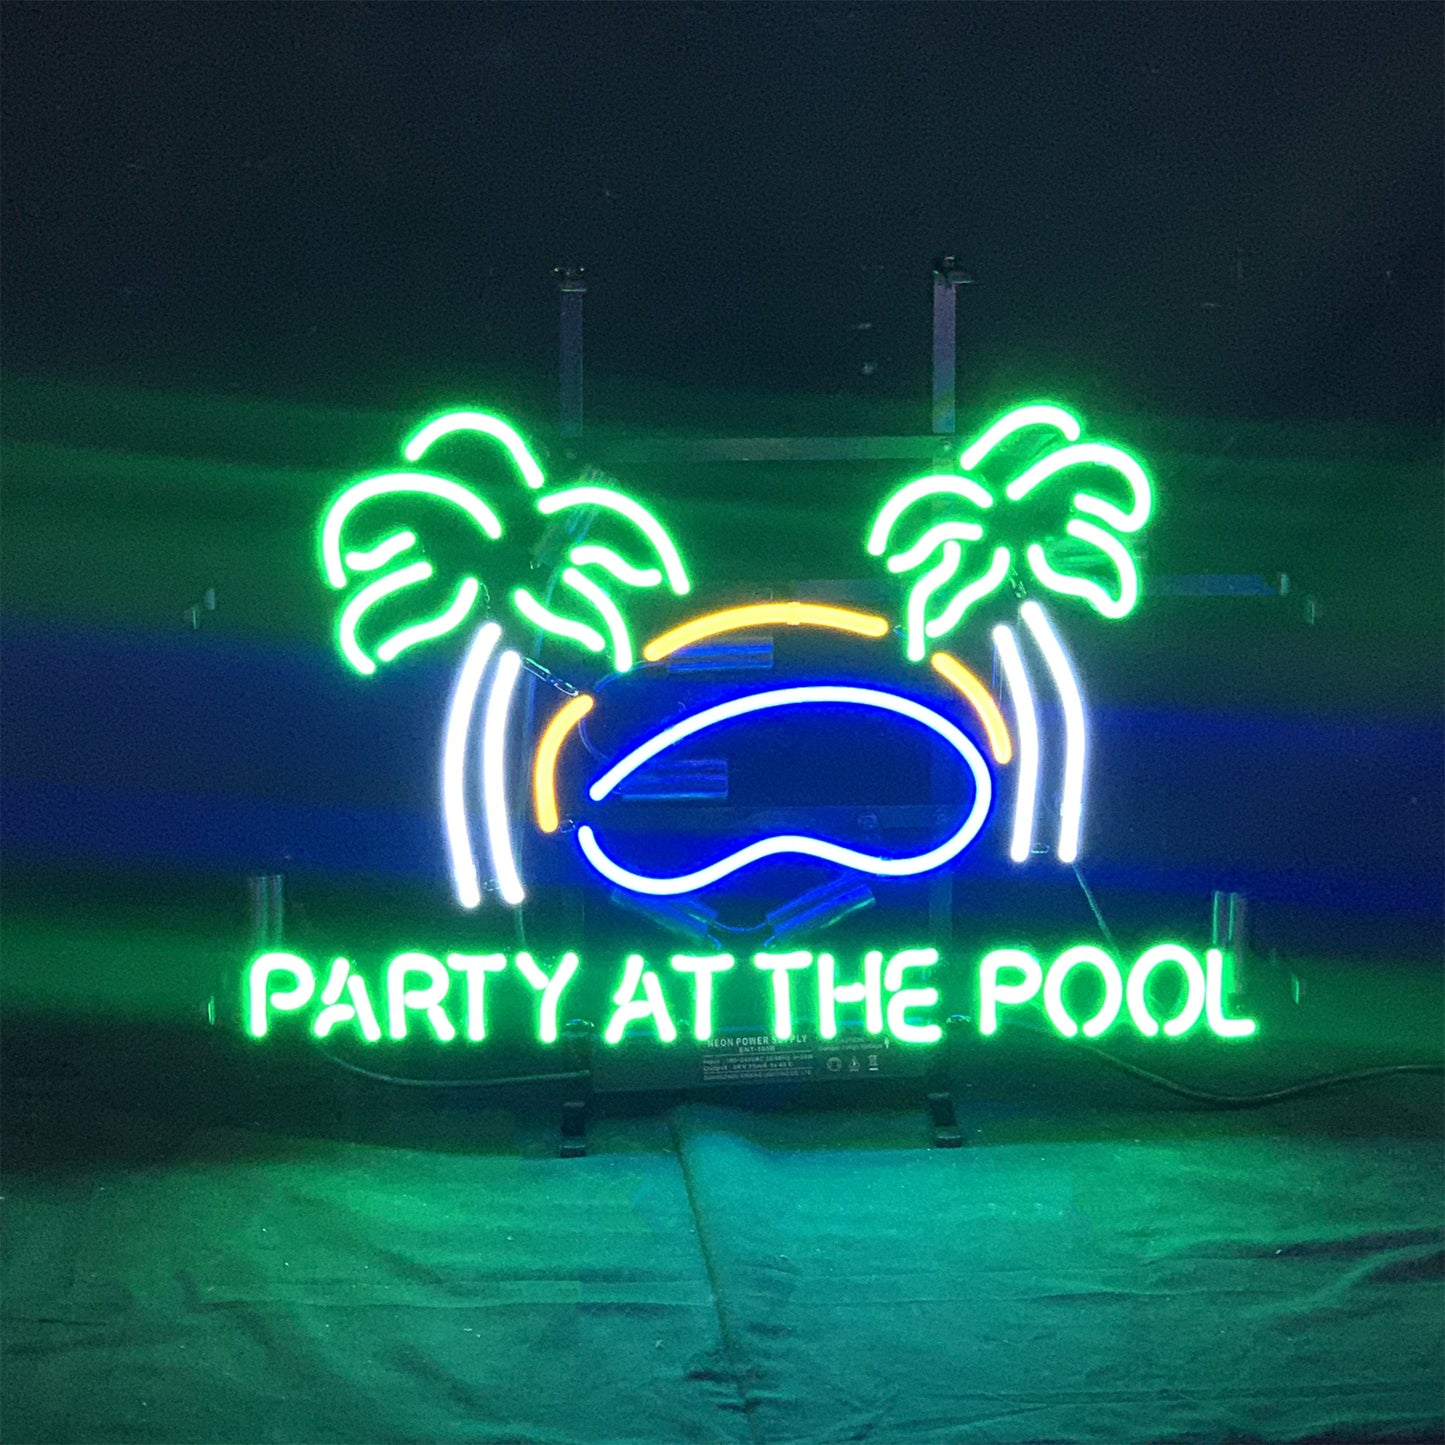 PARTY AT THE POOL